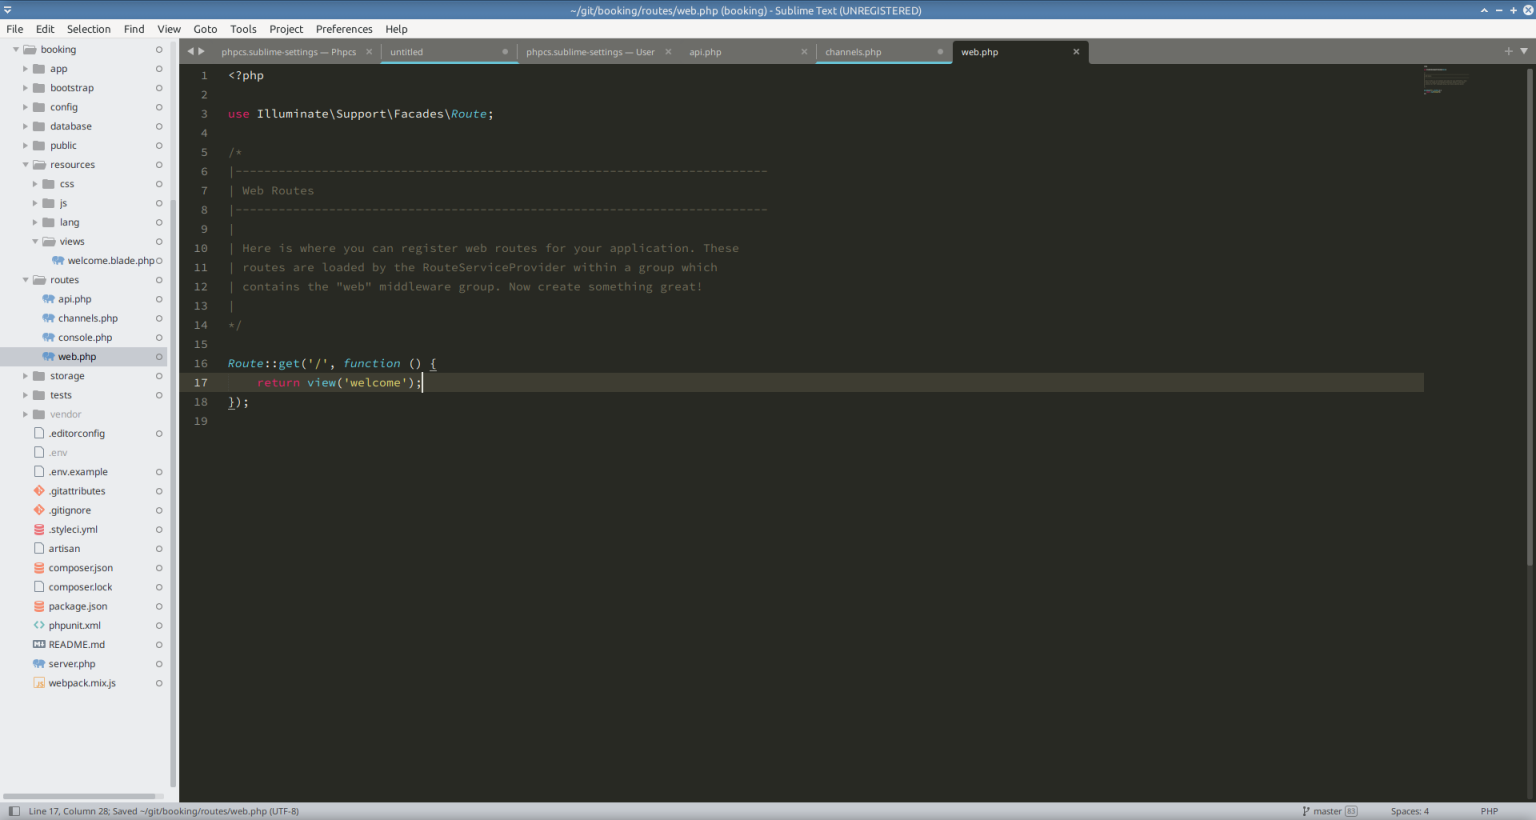 Sublime Text 4.4151 download the last version for windows